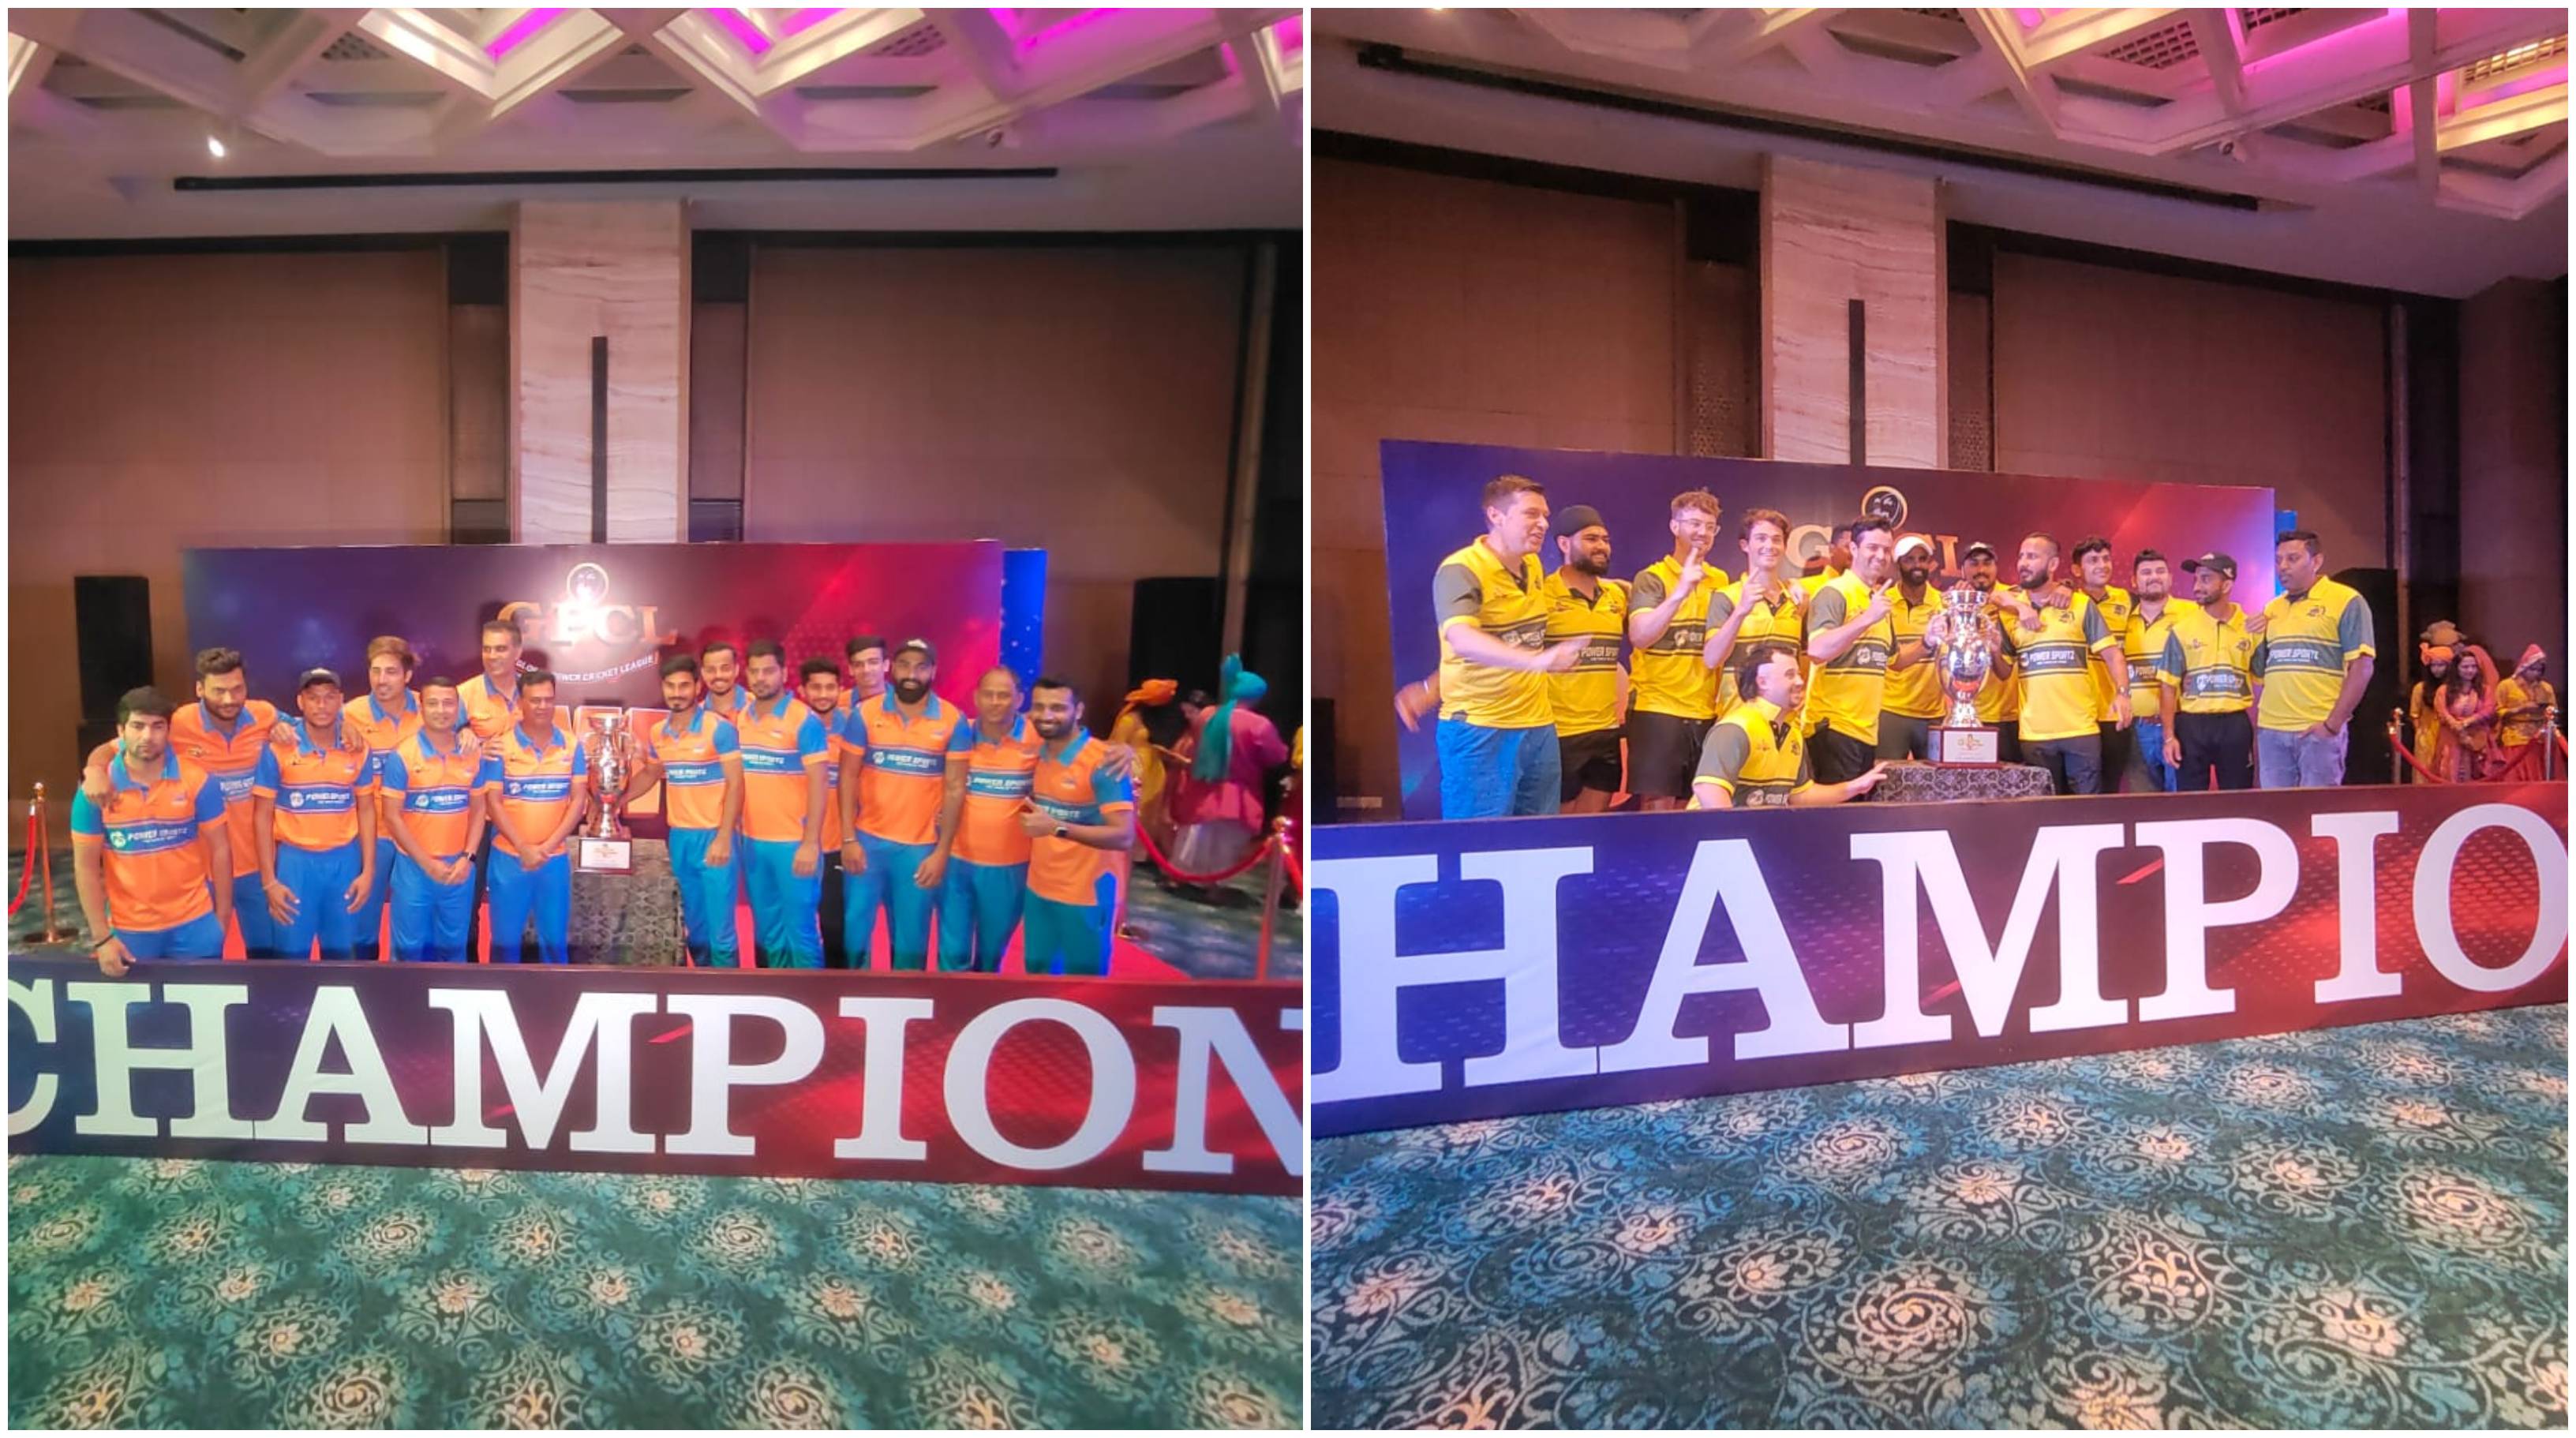 Indian Sapphires and Australian Golds were declared joint winners of the inaugural GPCL season